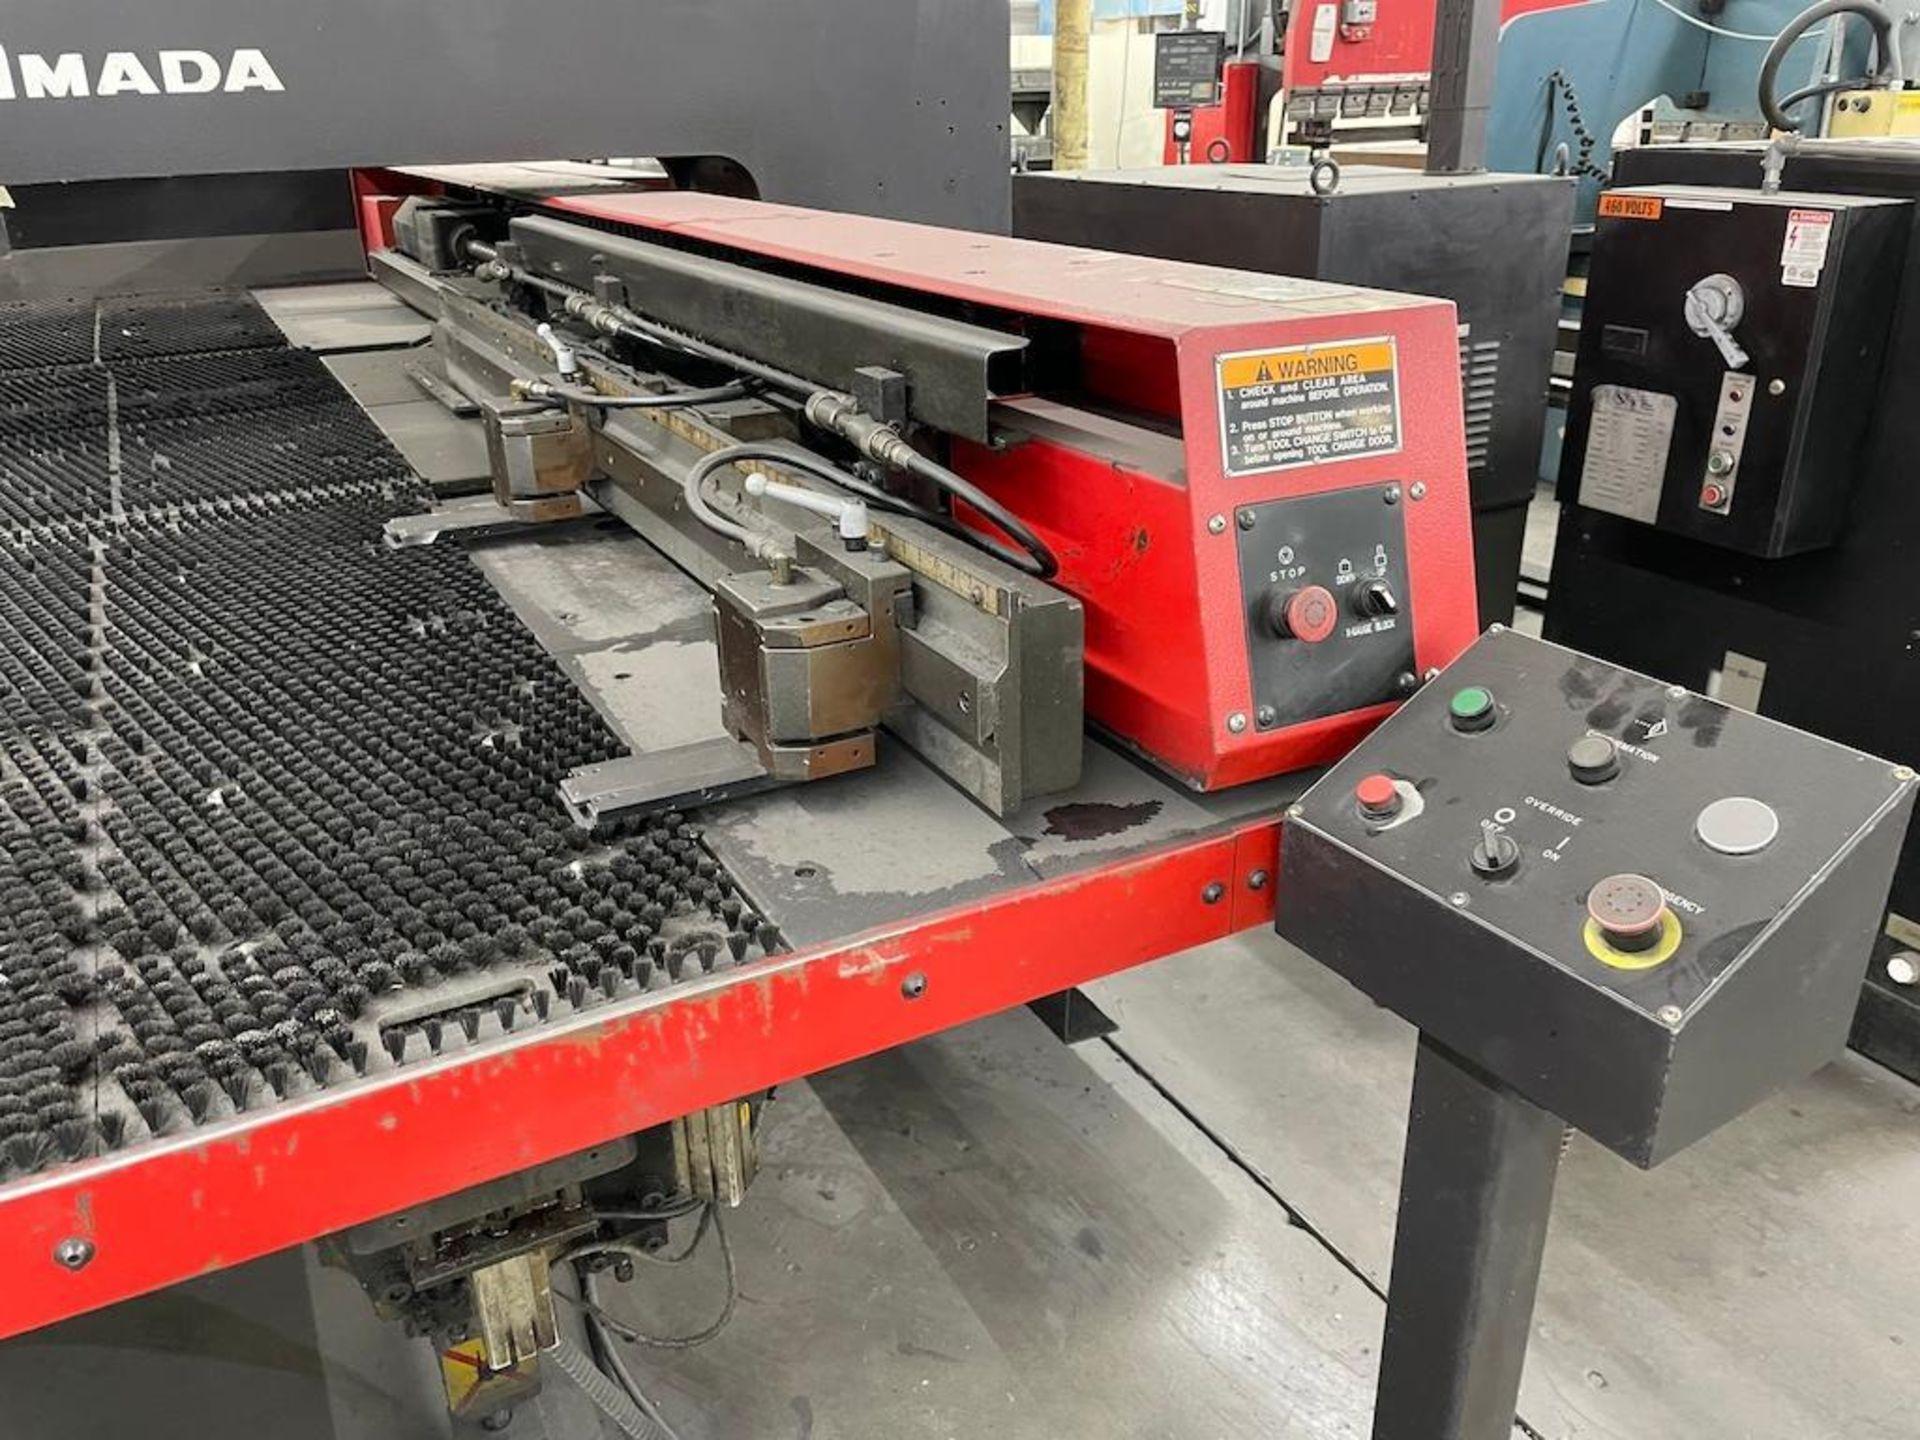 AMADA VIPROSS 358 KING II, 30 TON TURRET PUNCH, 58 STATION TURRET W 4 AUTO INDEX, TABLE TRAVEL 50 IN - Image 6 of 11